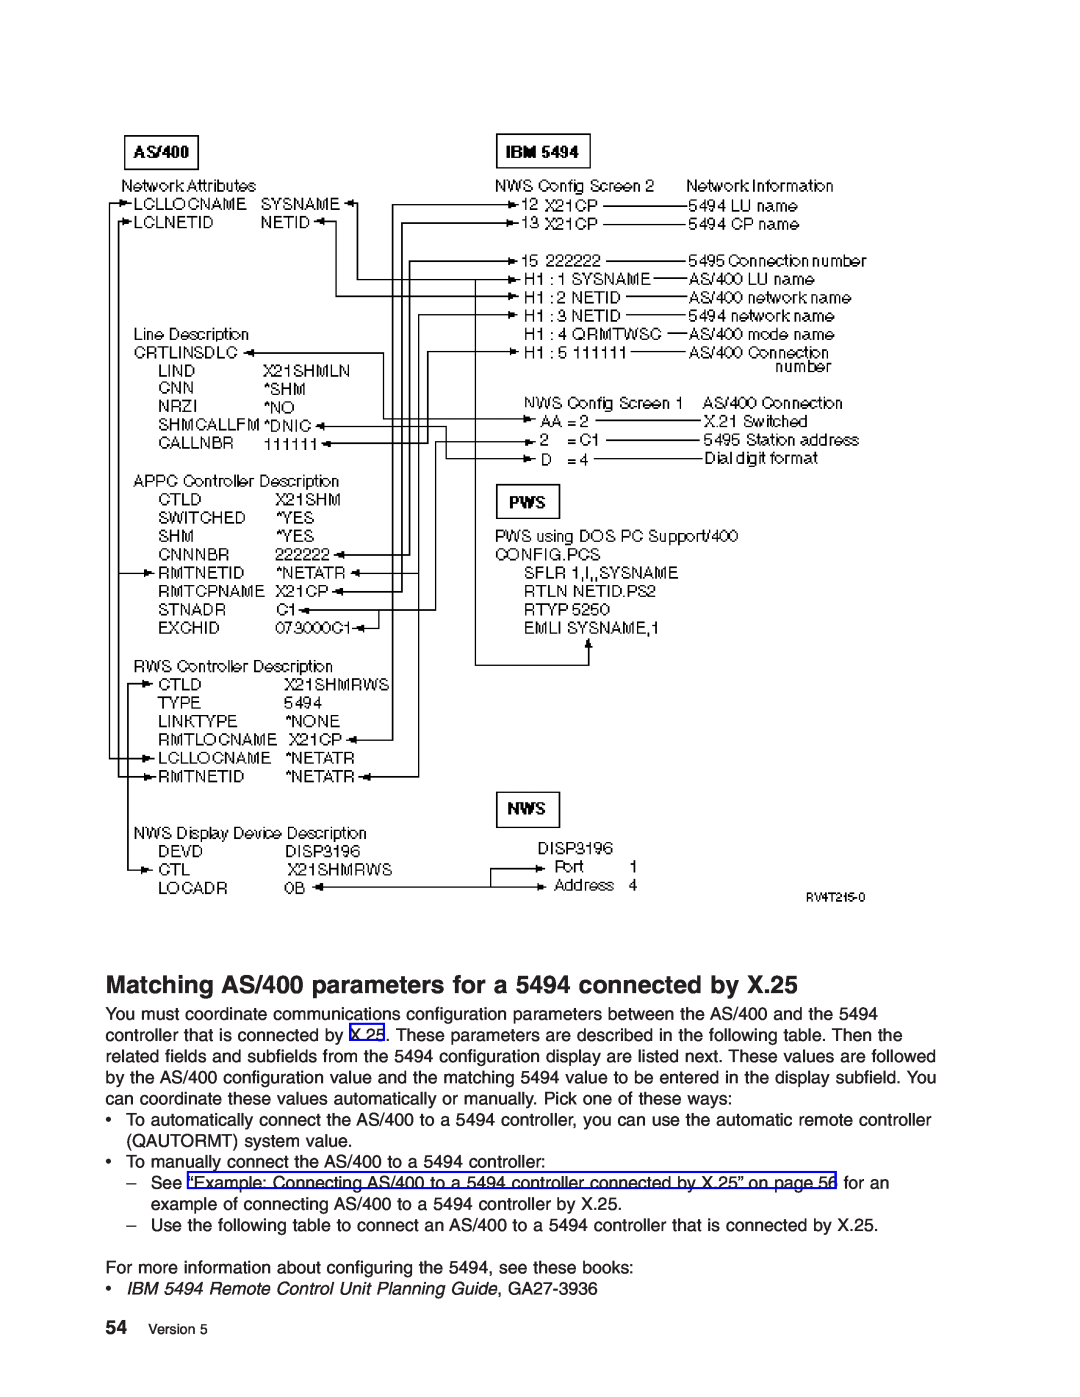 IBM manual Matching AS/400 parameters for a 5494 connected by, v IBM 5494 Remote Control Unit Planning Guide, GA27-3936 